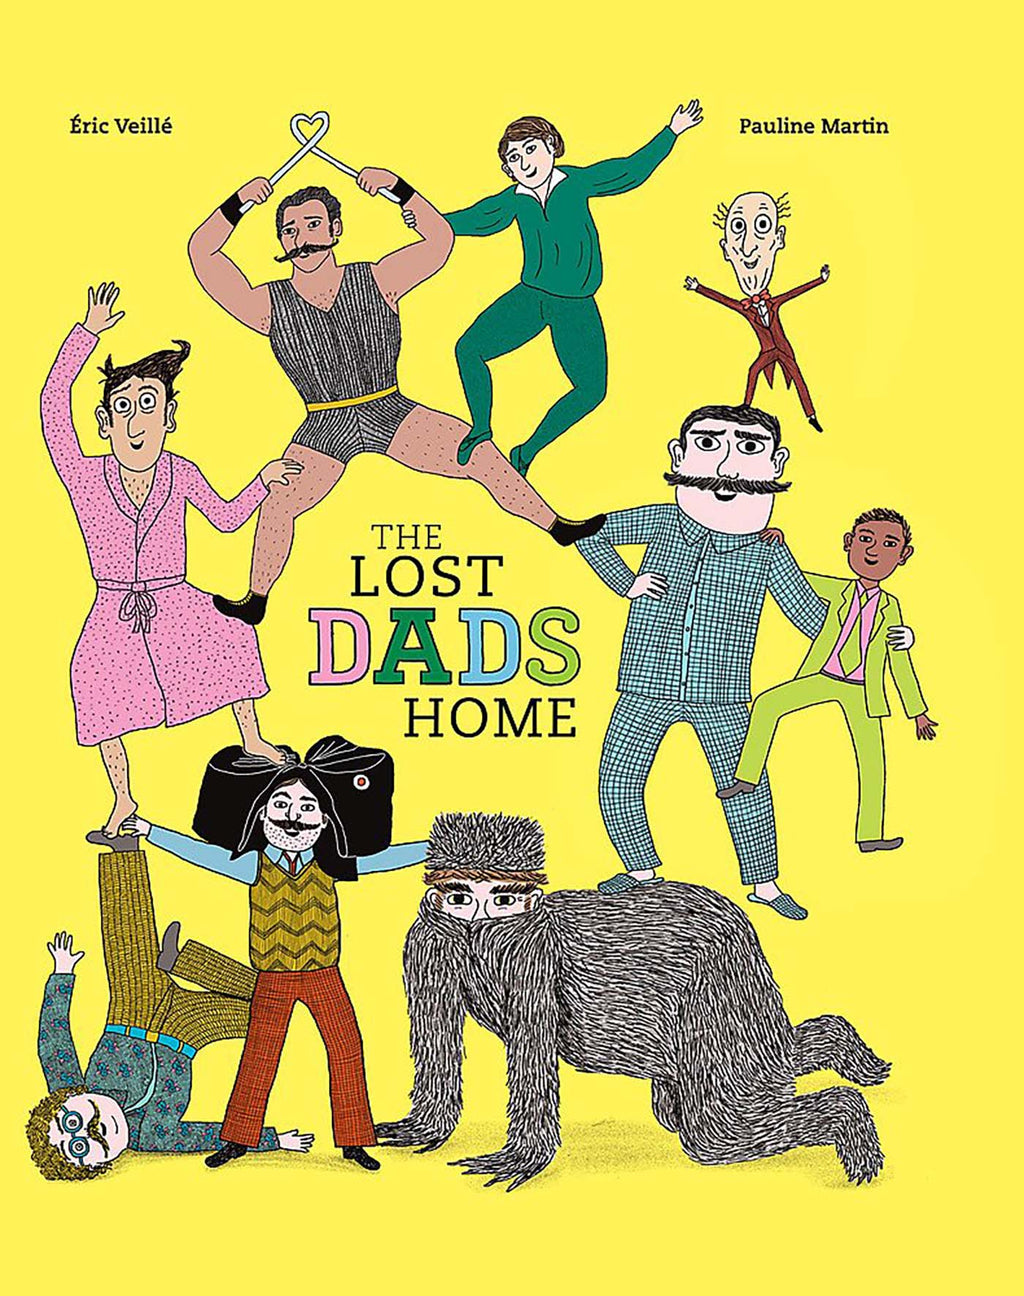 The Lost Dads Home